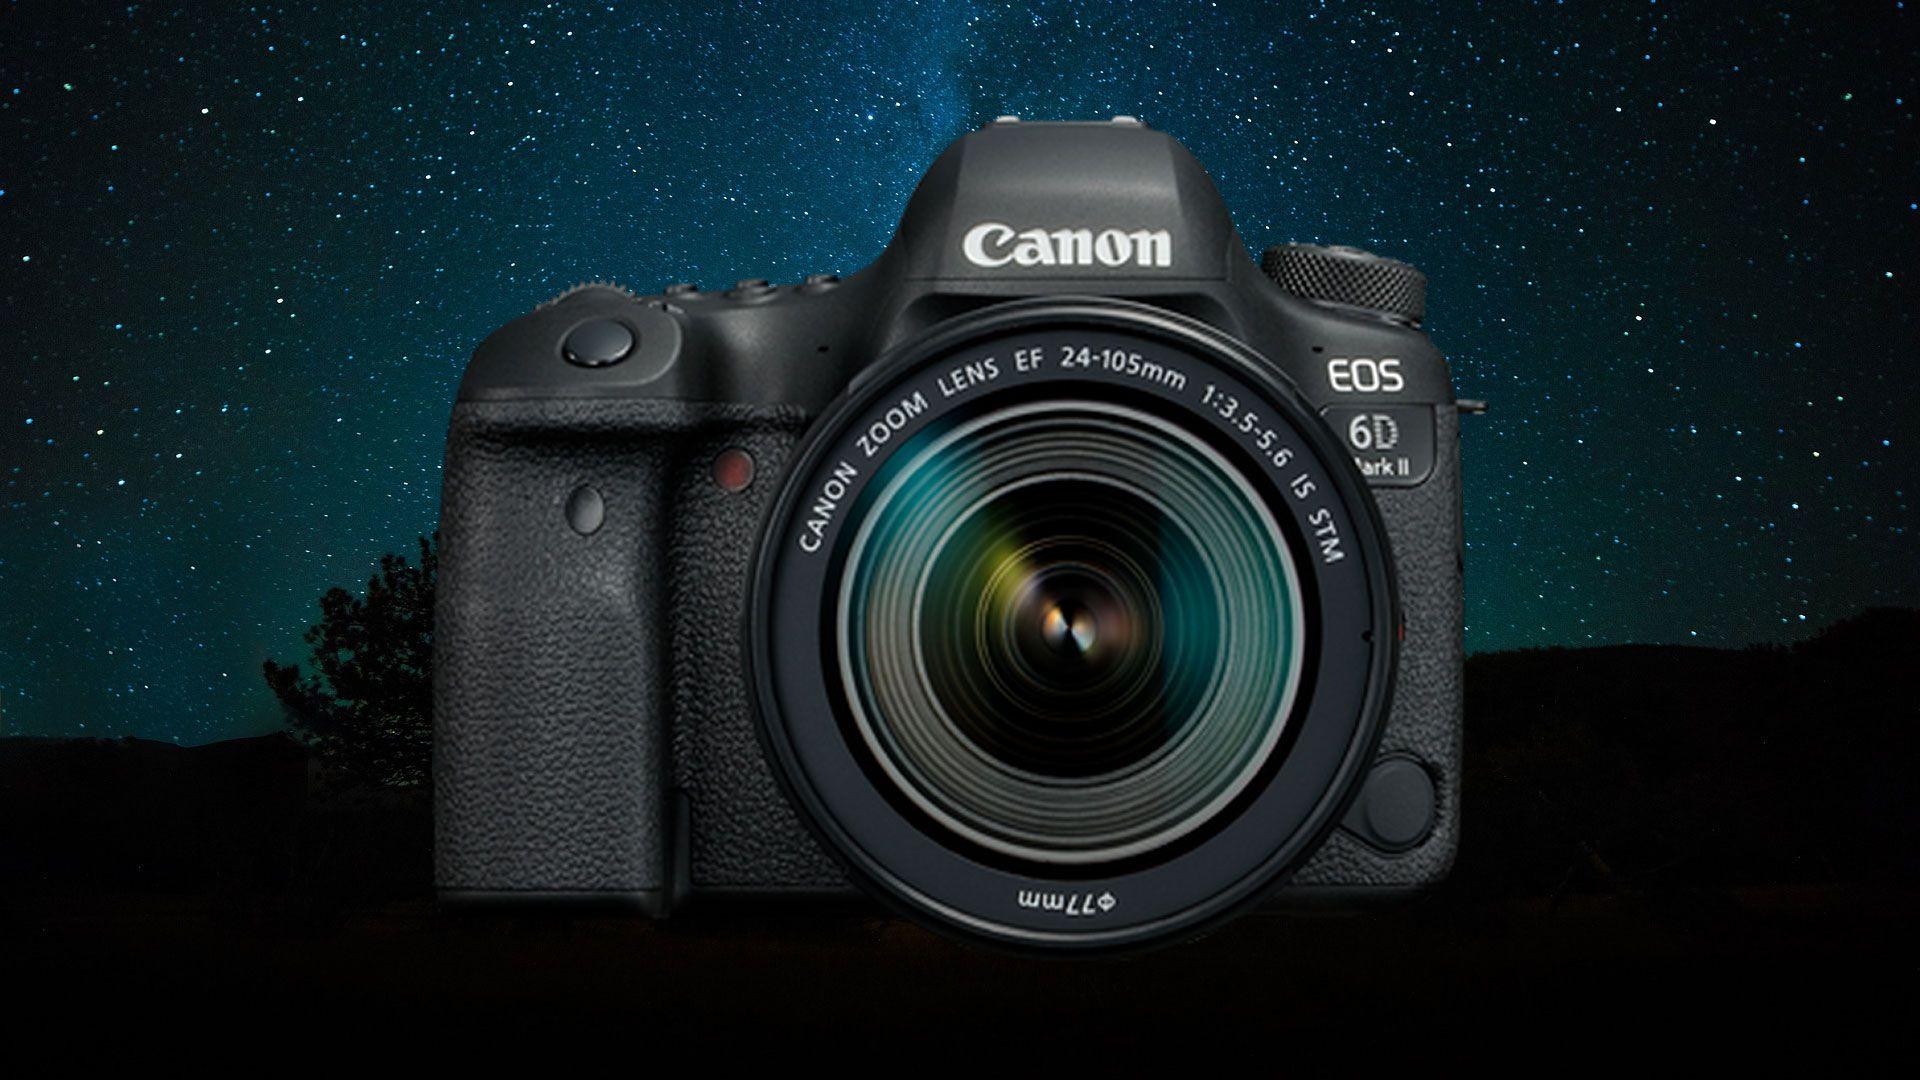 Testing the Canon 6D Mark II for astrophotography nightscapes